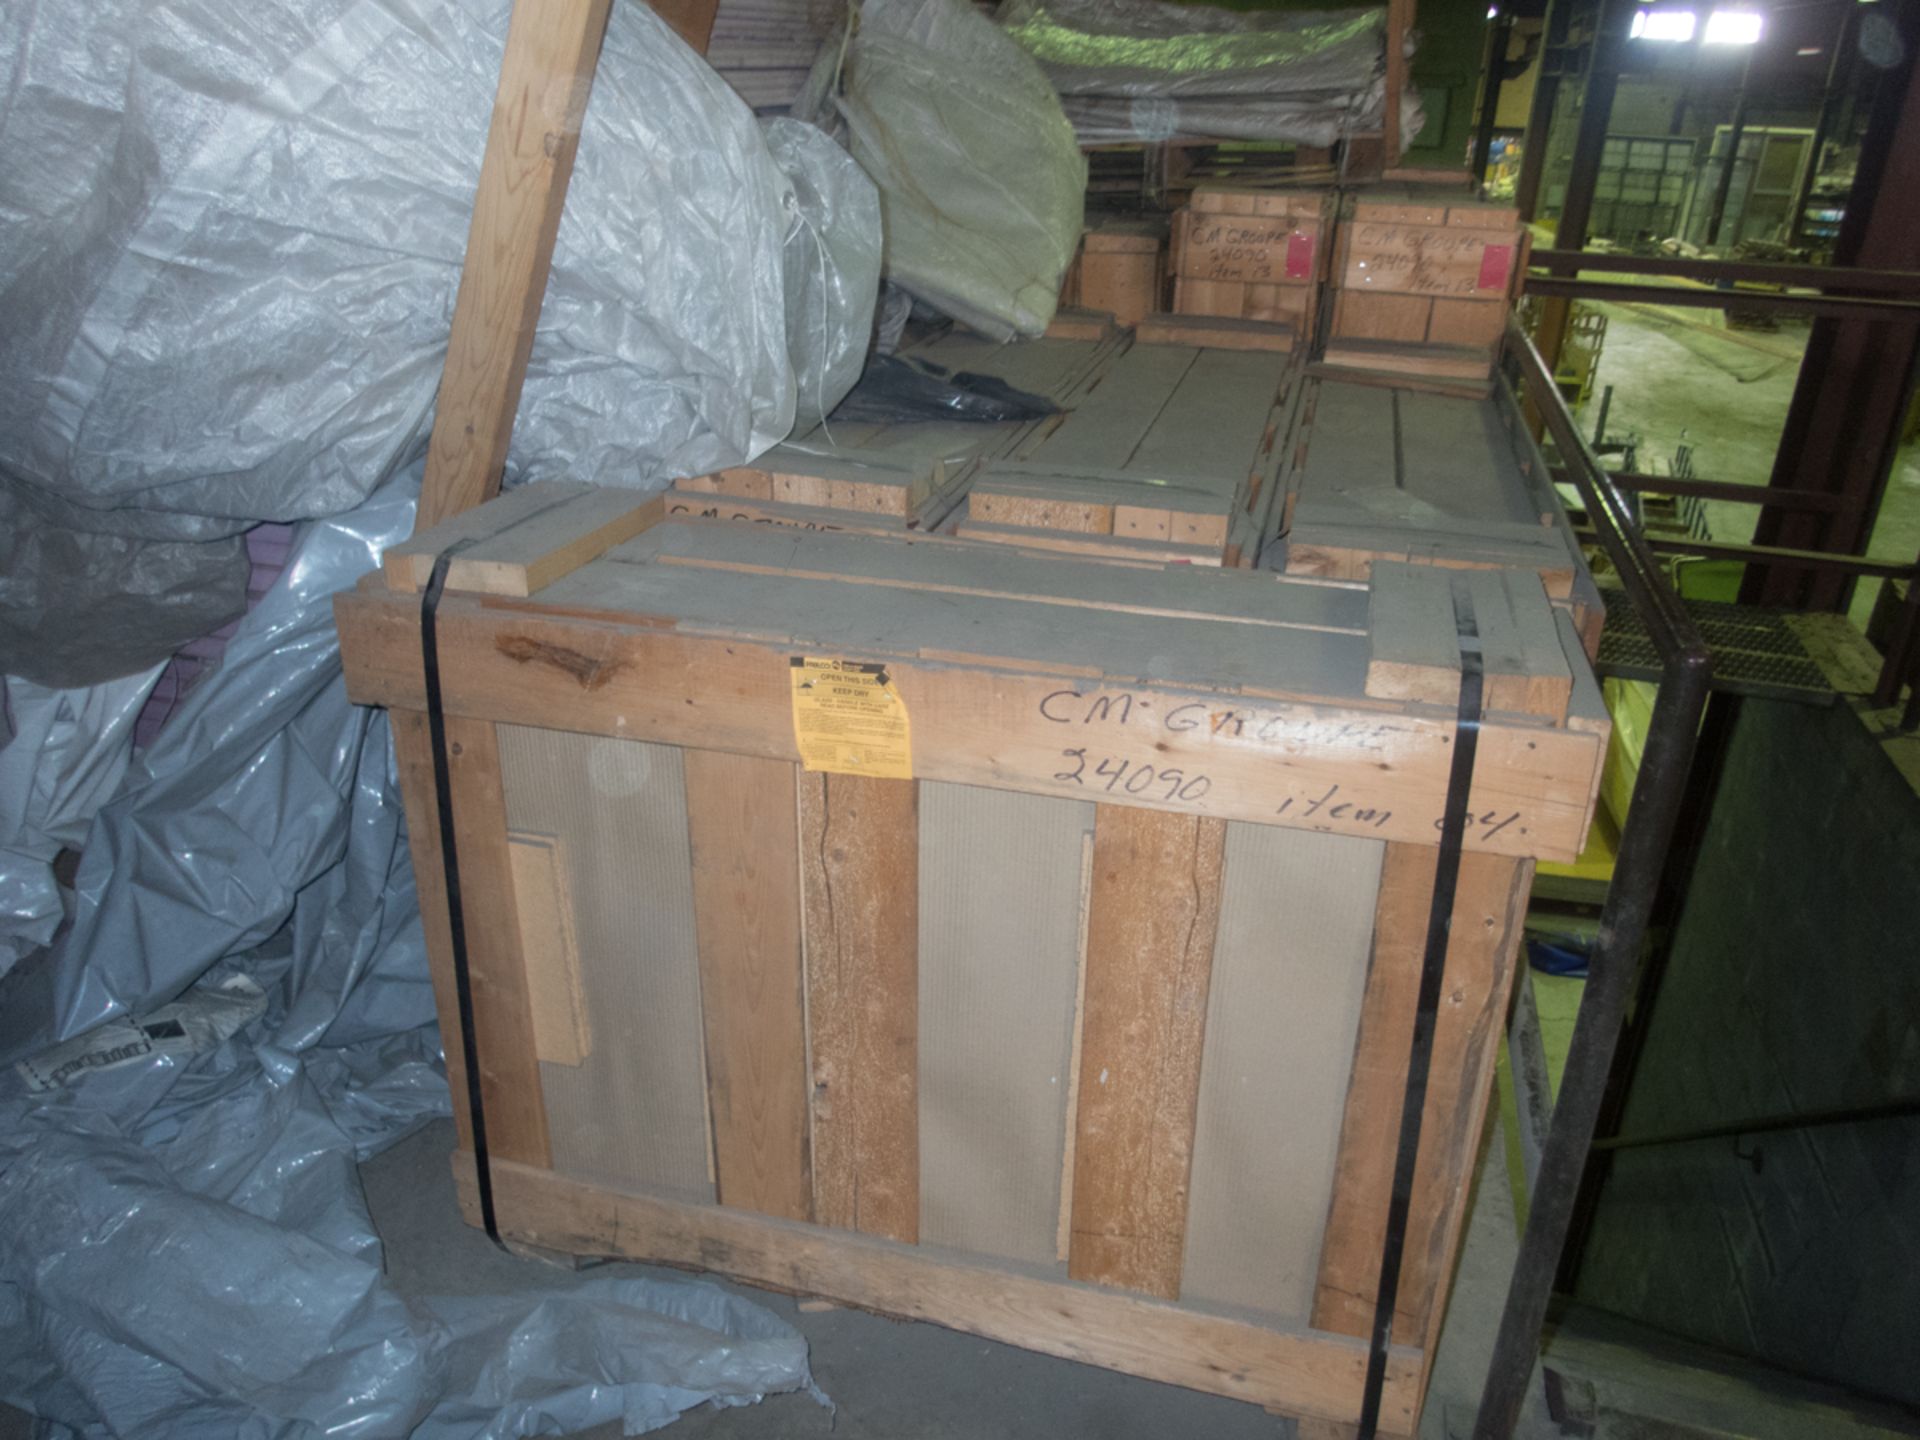 LOT OF ASSORTED STYROFOAM, INSULATION PANELS, GLASS ETC (BASSINETTE/ANTIQUES NOT INCLUDED) - Image 2 of 5